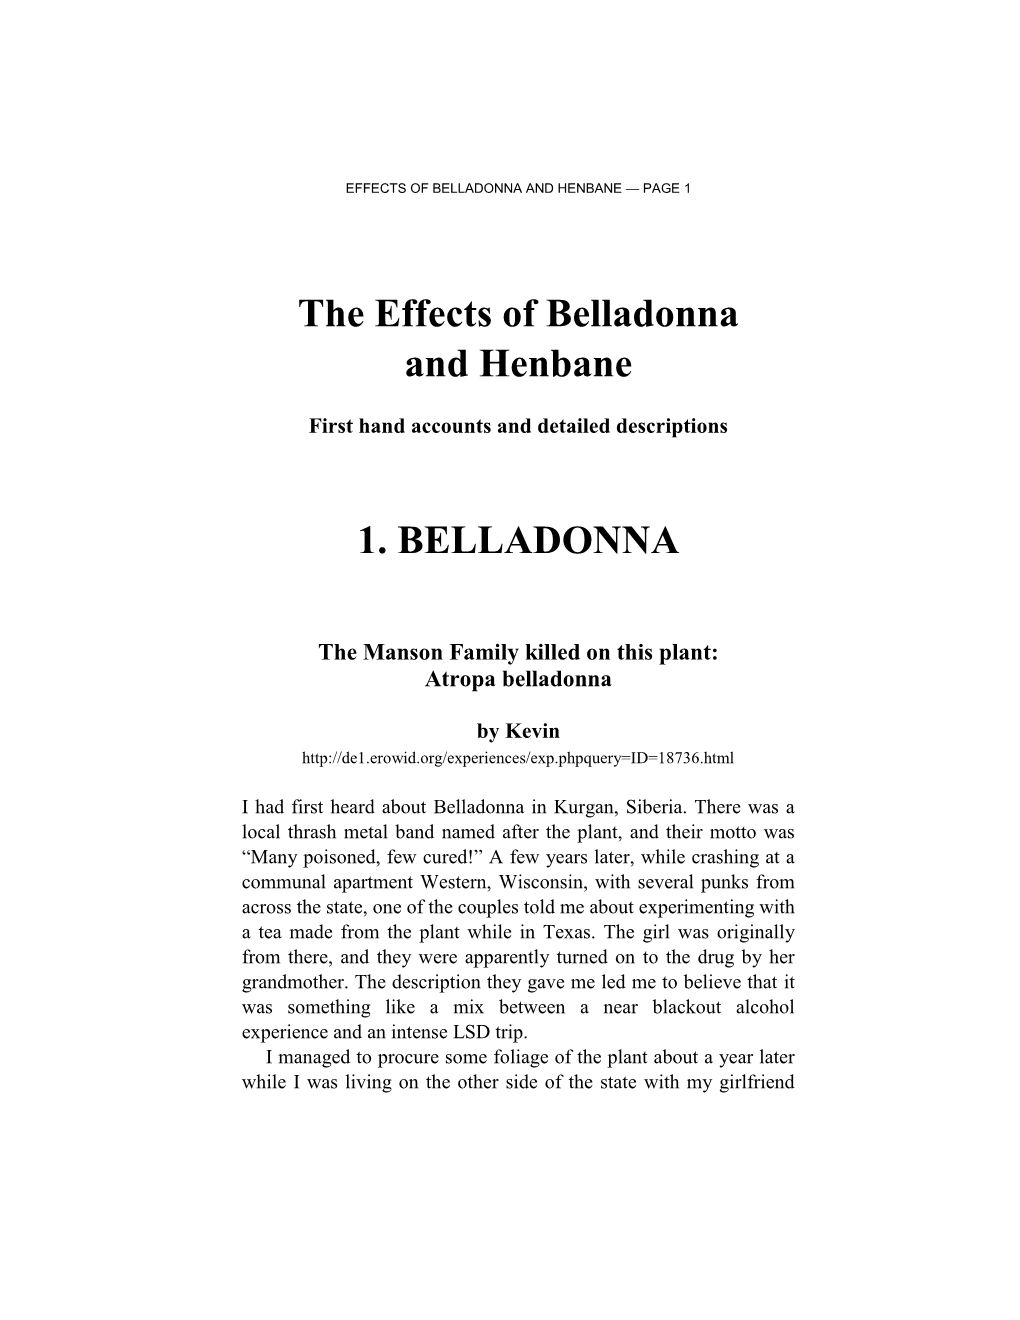 The Effects of Belladonna and Henbane